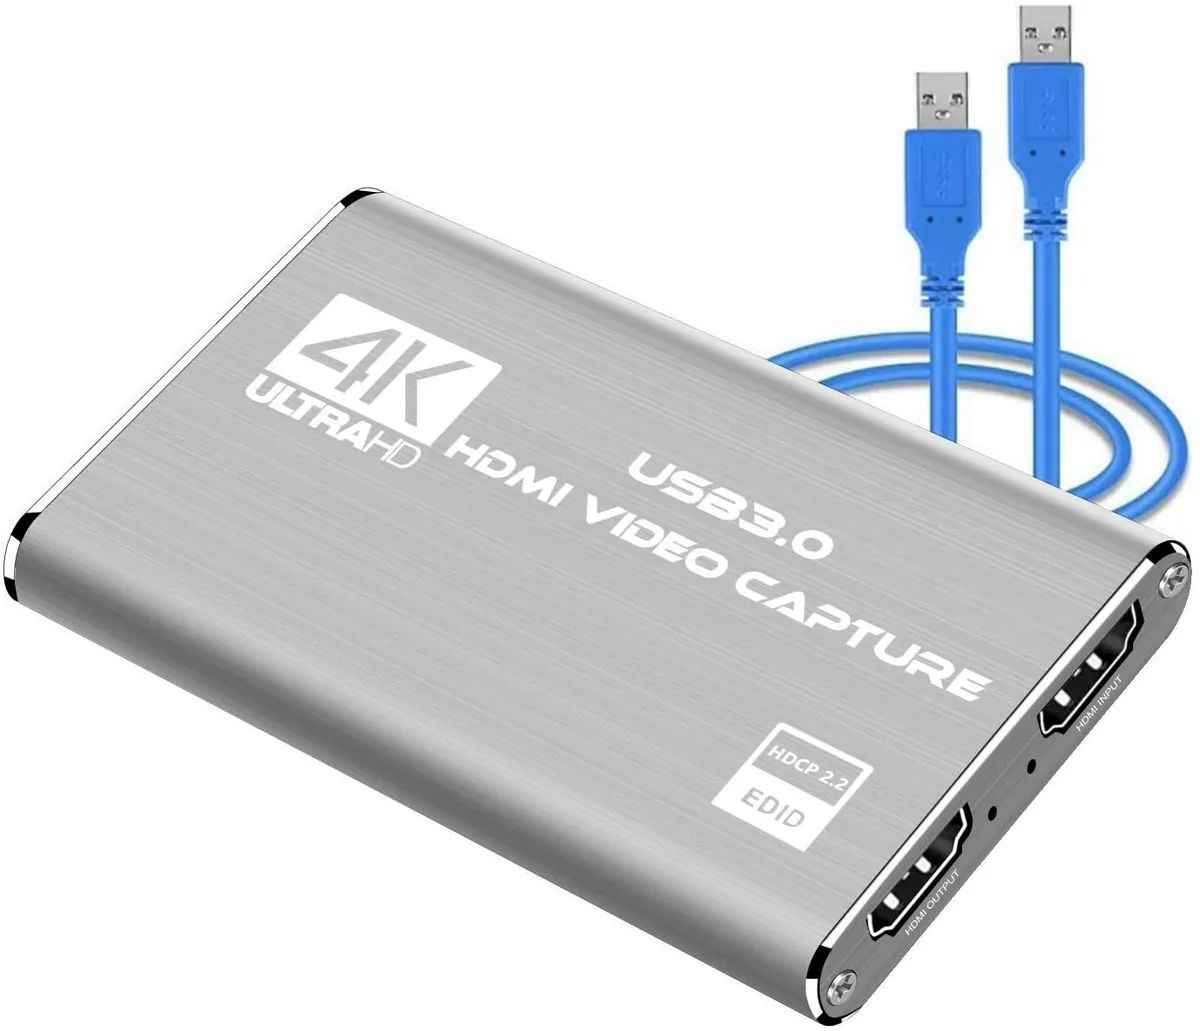 15 Amazing Hdmi Capture Card 4K for 2023